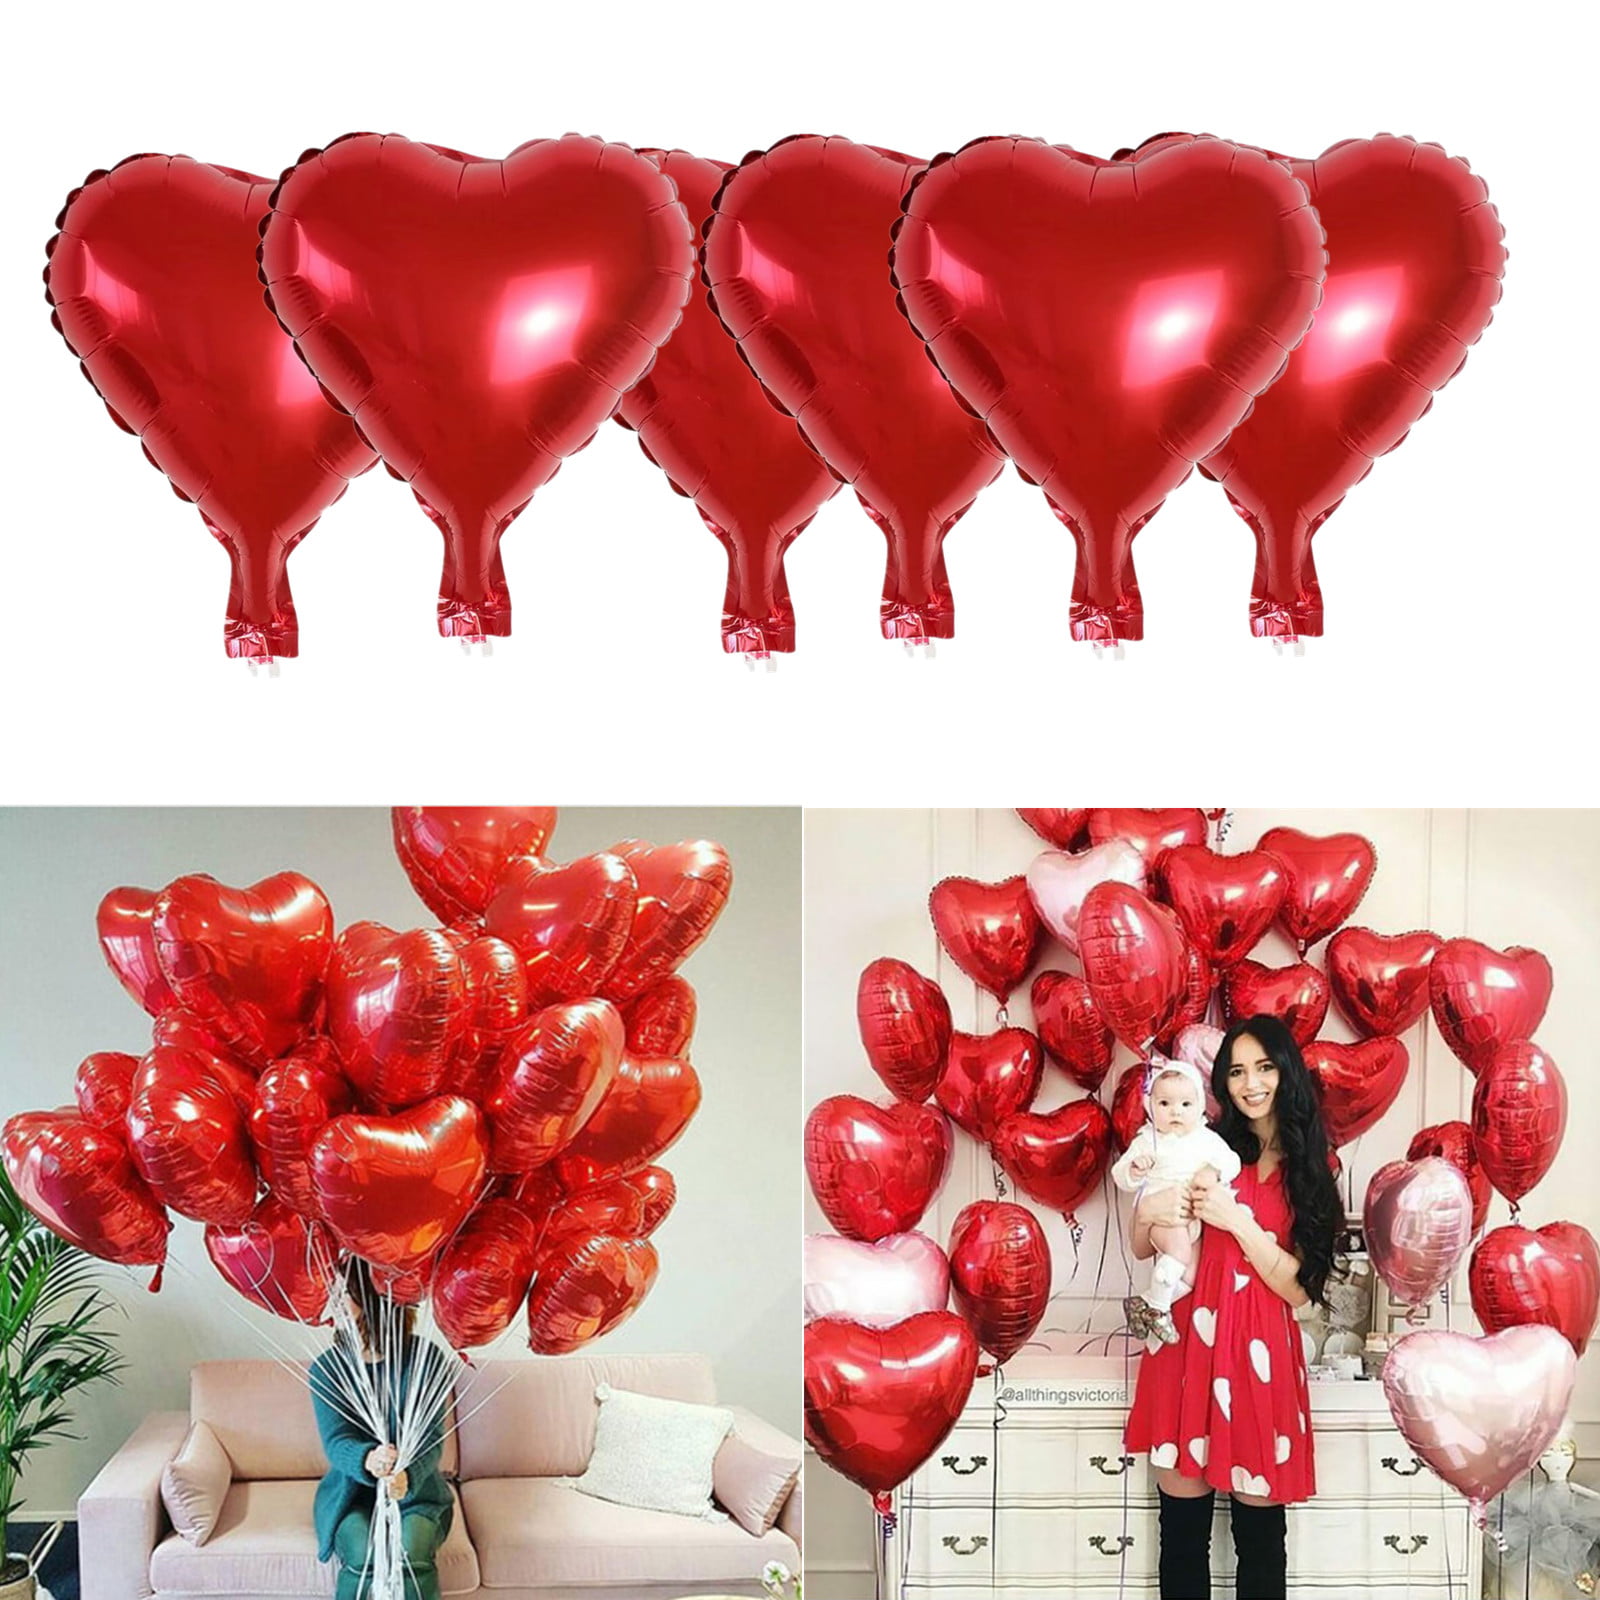 TriProducts Helium Gas Cylinder W/ 10x 18inch Red Love Heart Foil Balloons 1x 1 